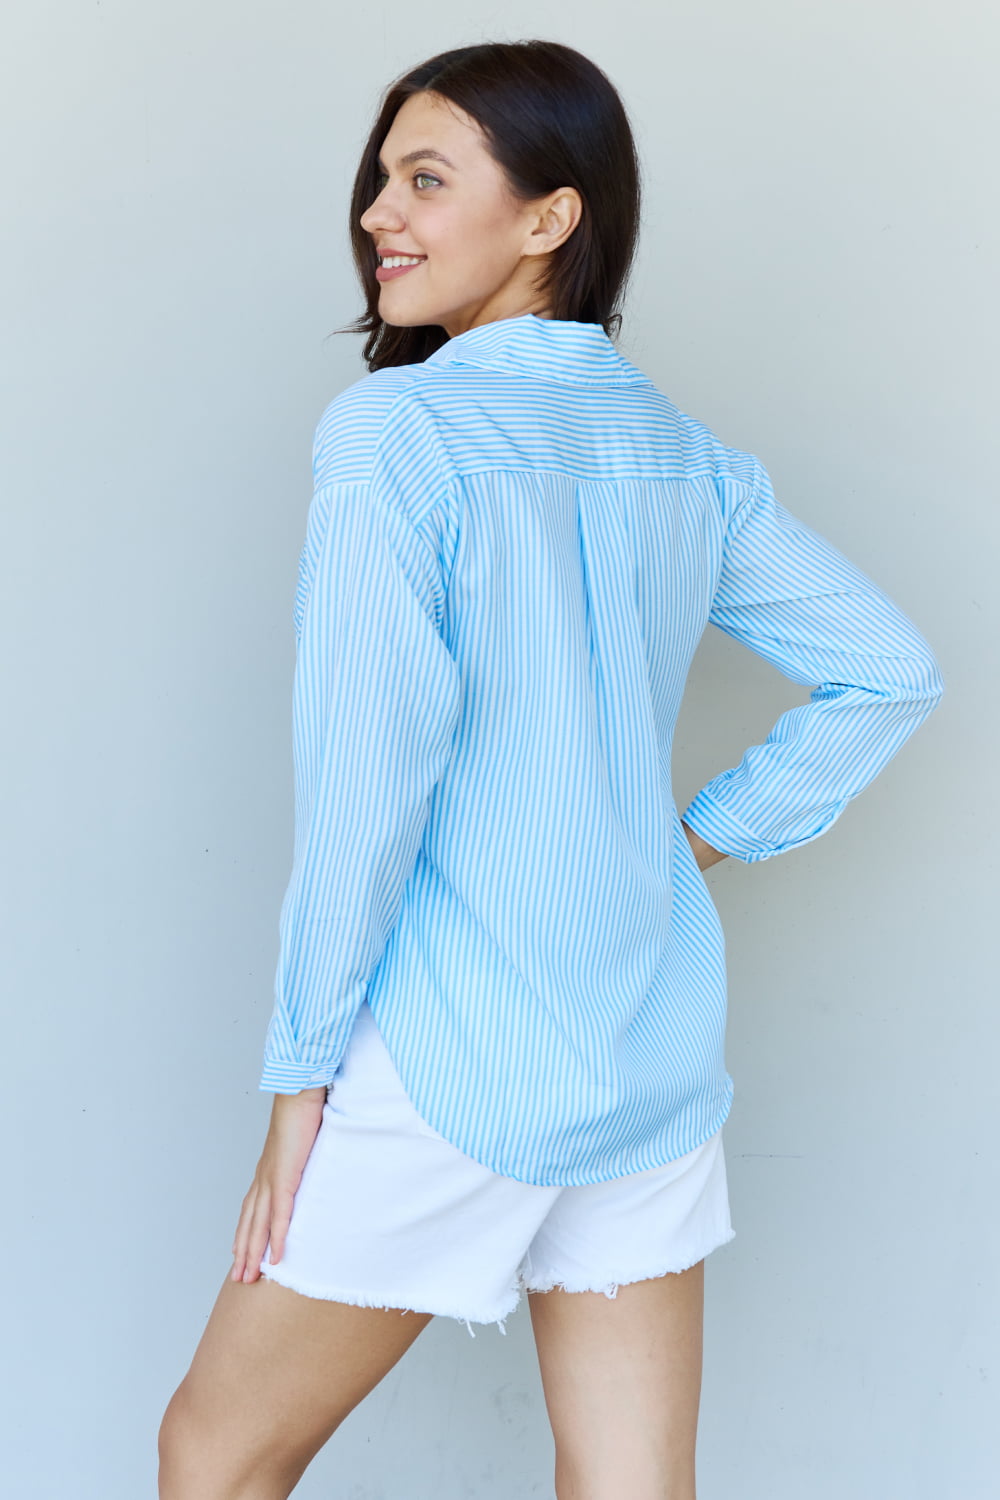 Doublju She Means Business Striped Button Down Shirt Top | us.meeeshop